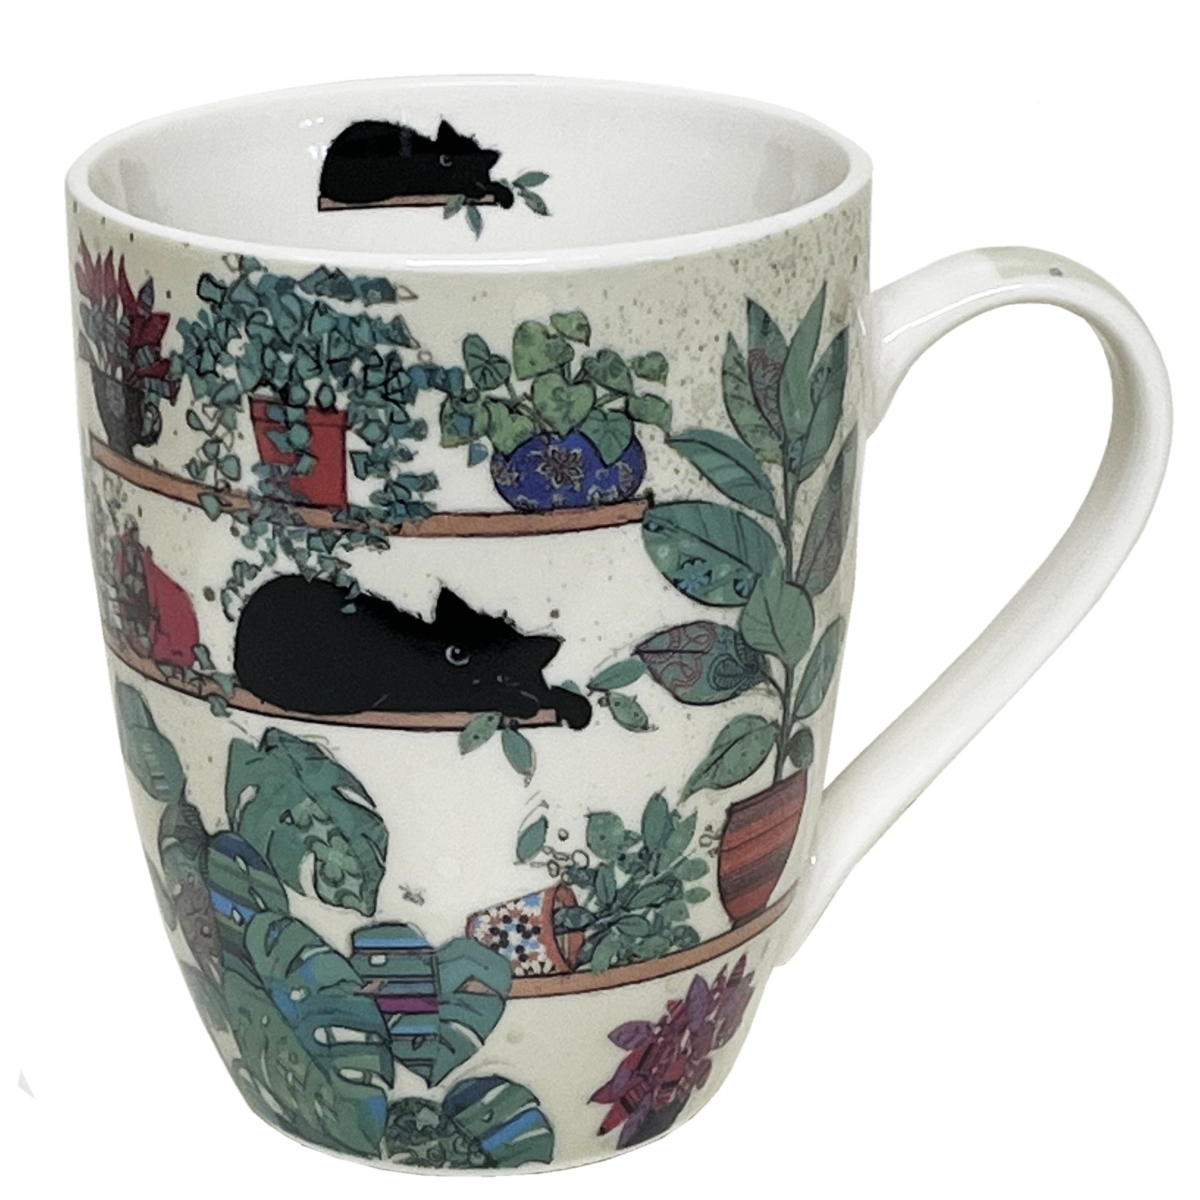 Kitten in Plants porcelain cup - kiub collection